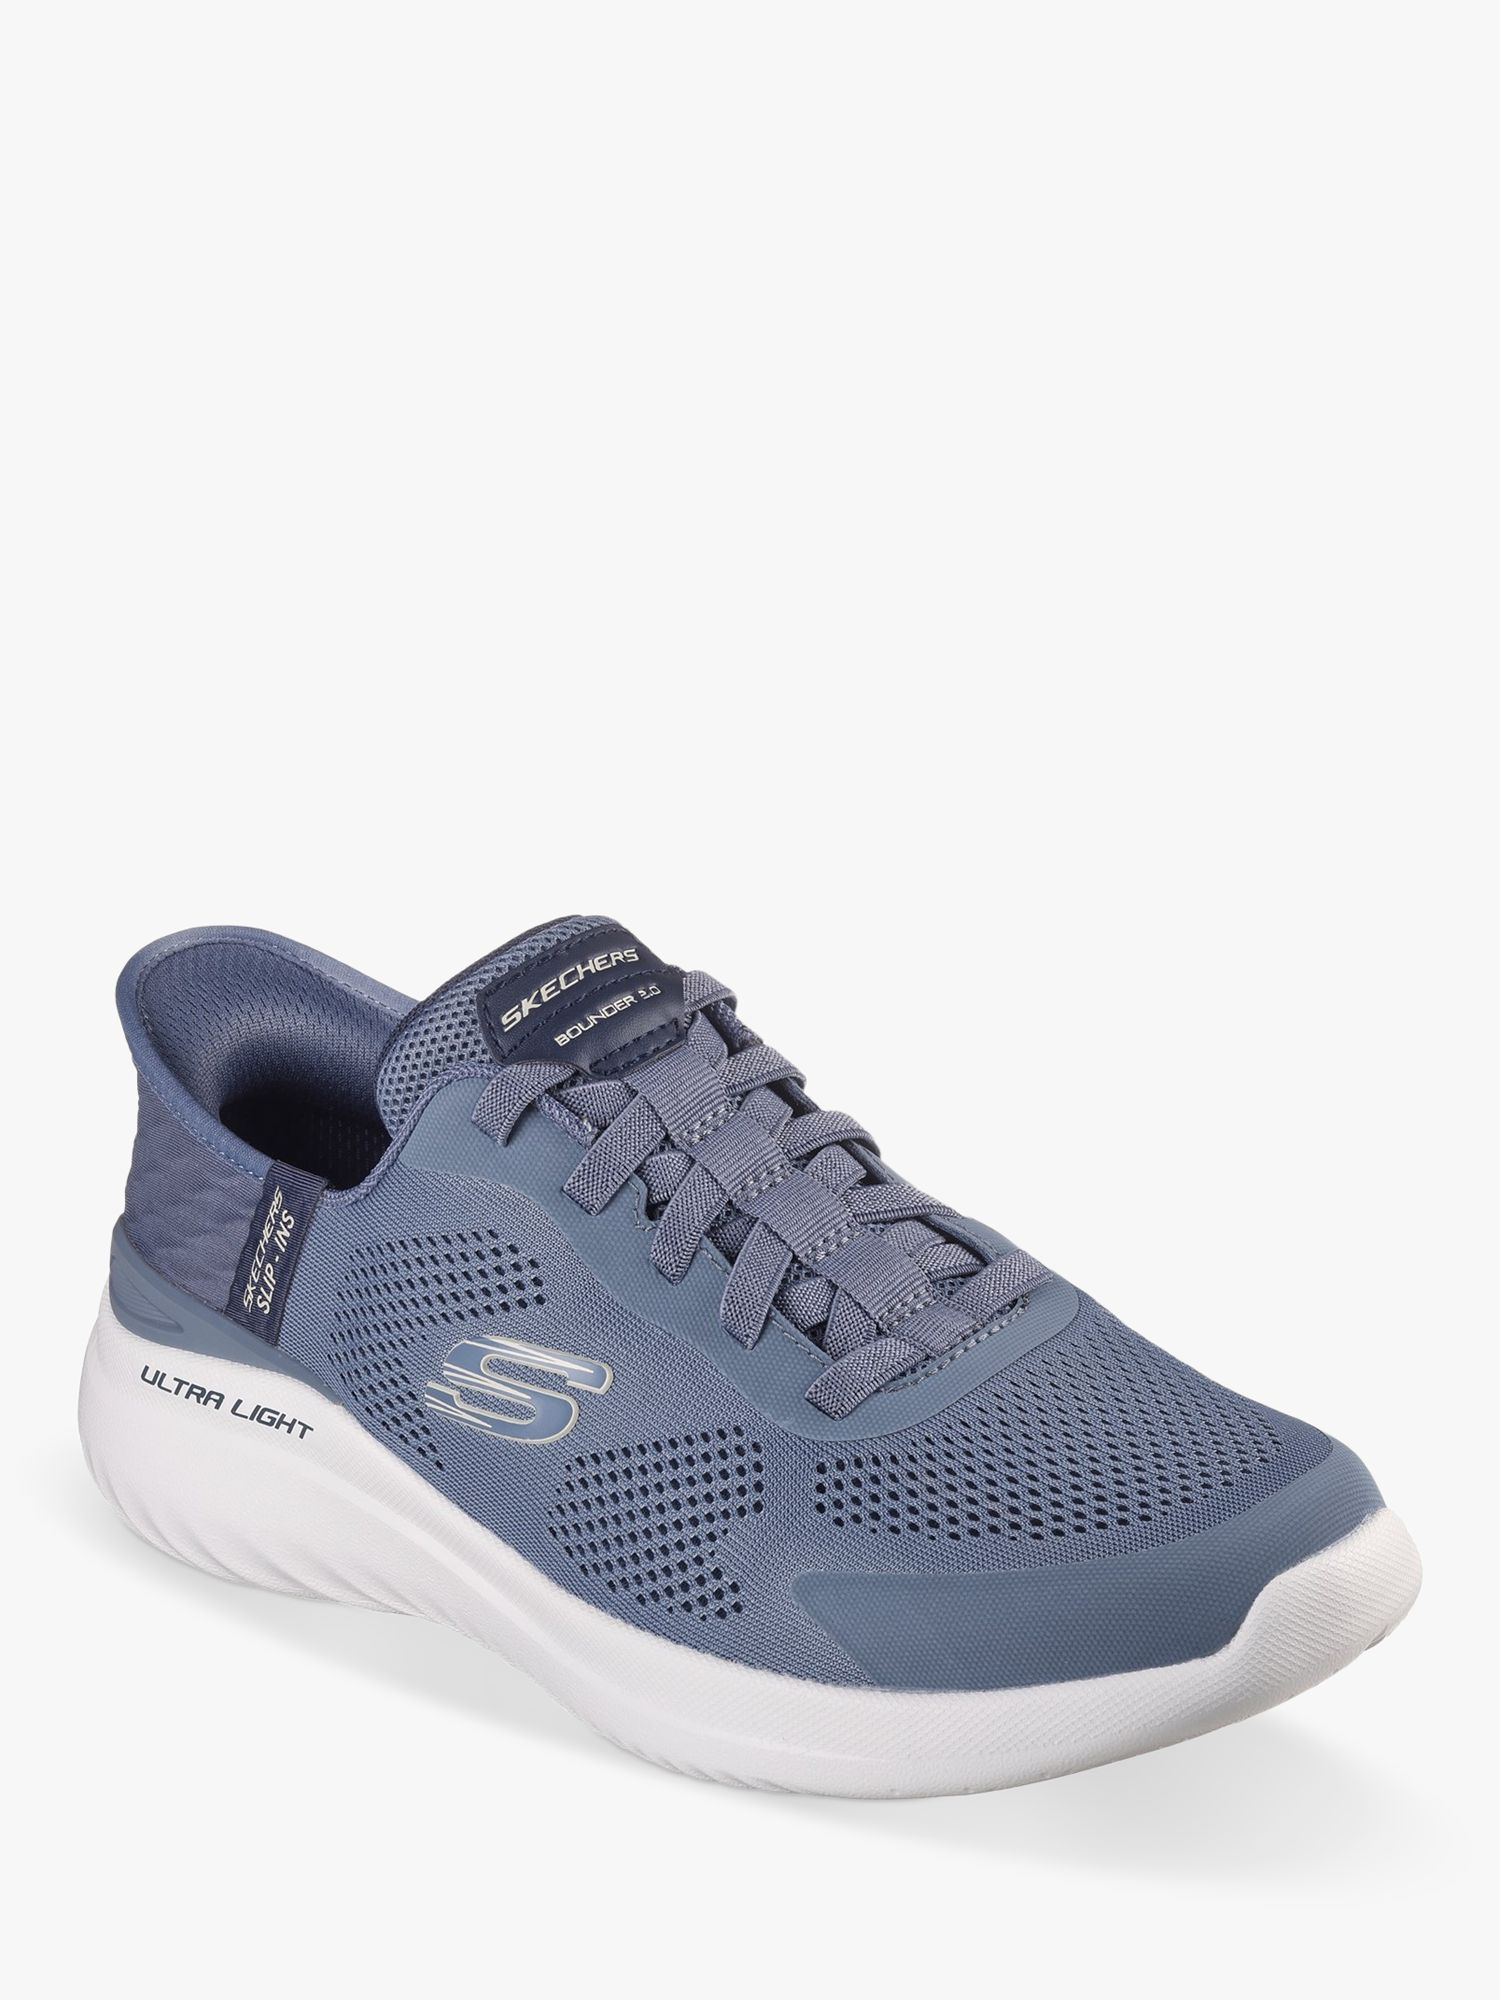 Skechers Bounder 2.0 Emerged Trainers, Blue at John Lewis & Partners